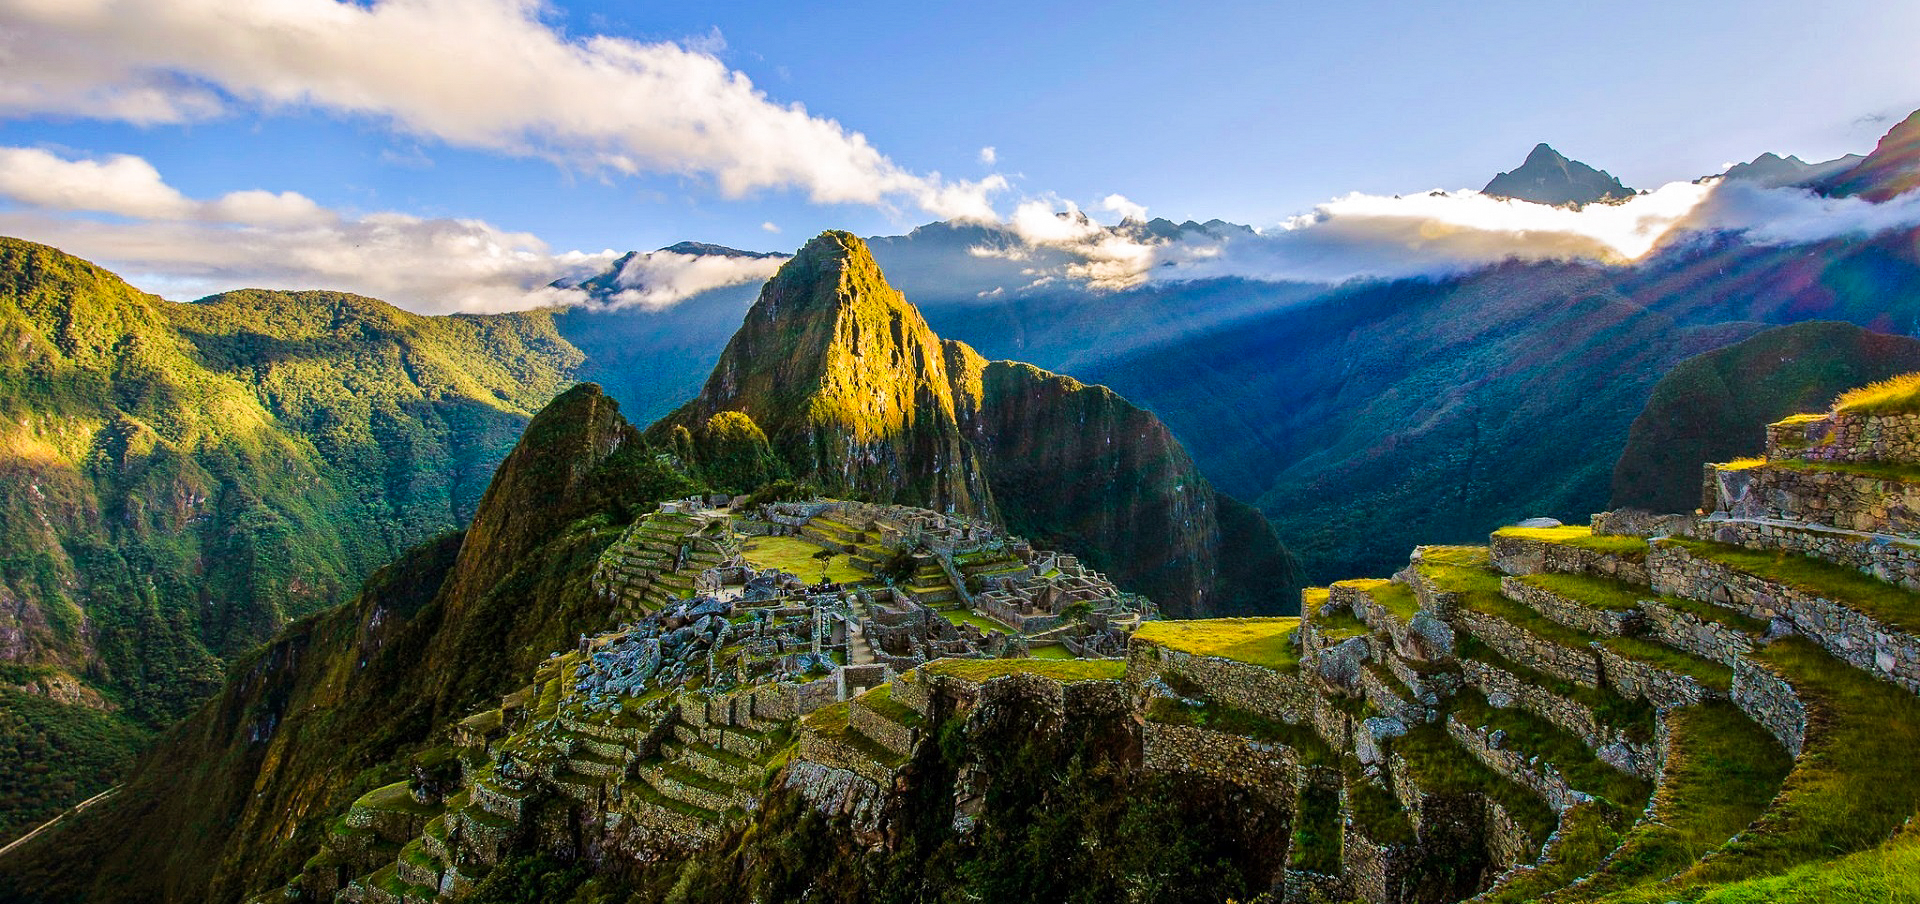 How much does it cost to trek to Machu Picchu?